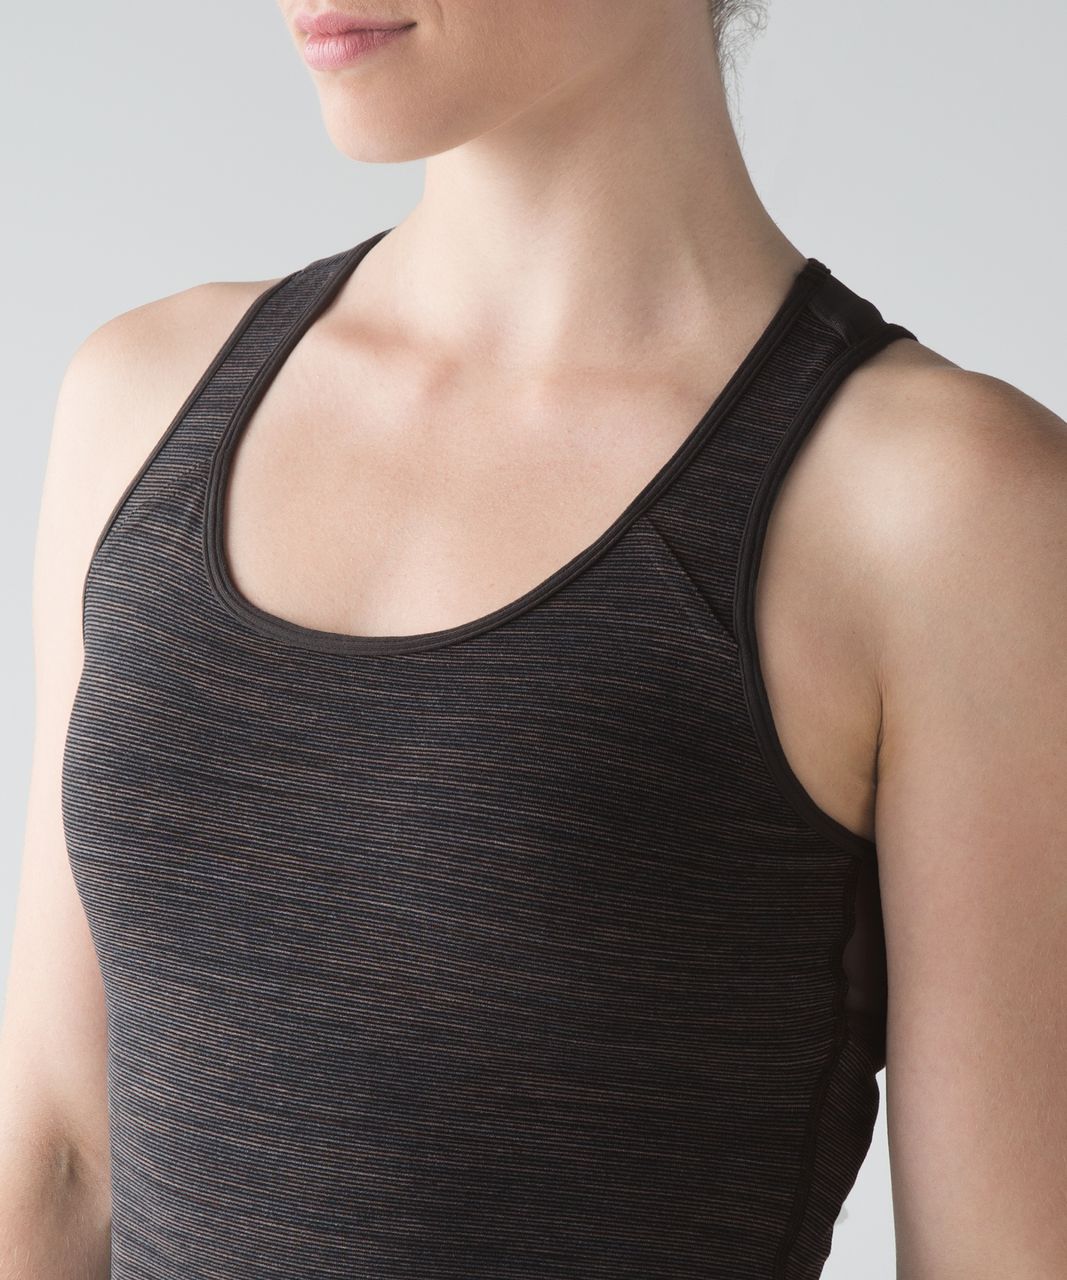 Lululemon Globetrotter Dress - Wee Are From Space Cool Cocoa Soot Light / Soot Light